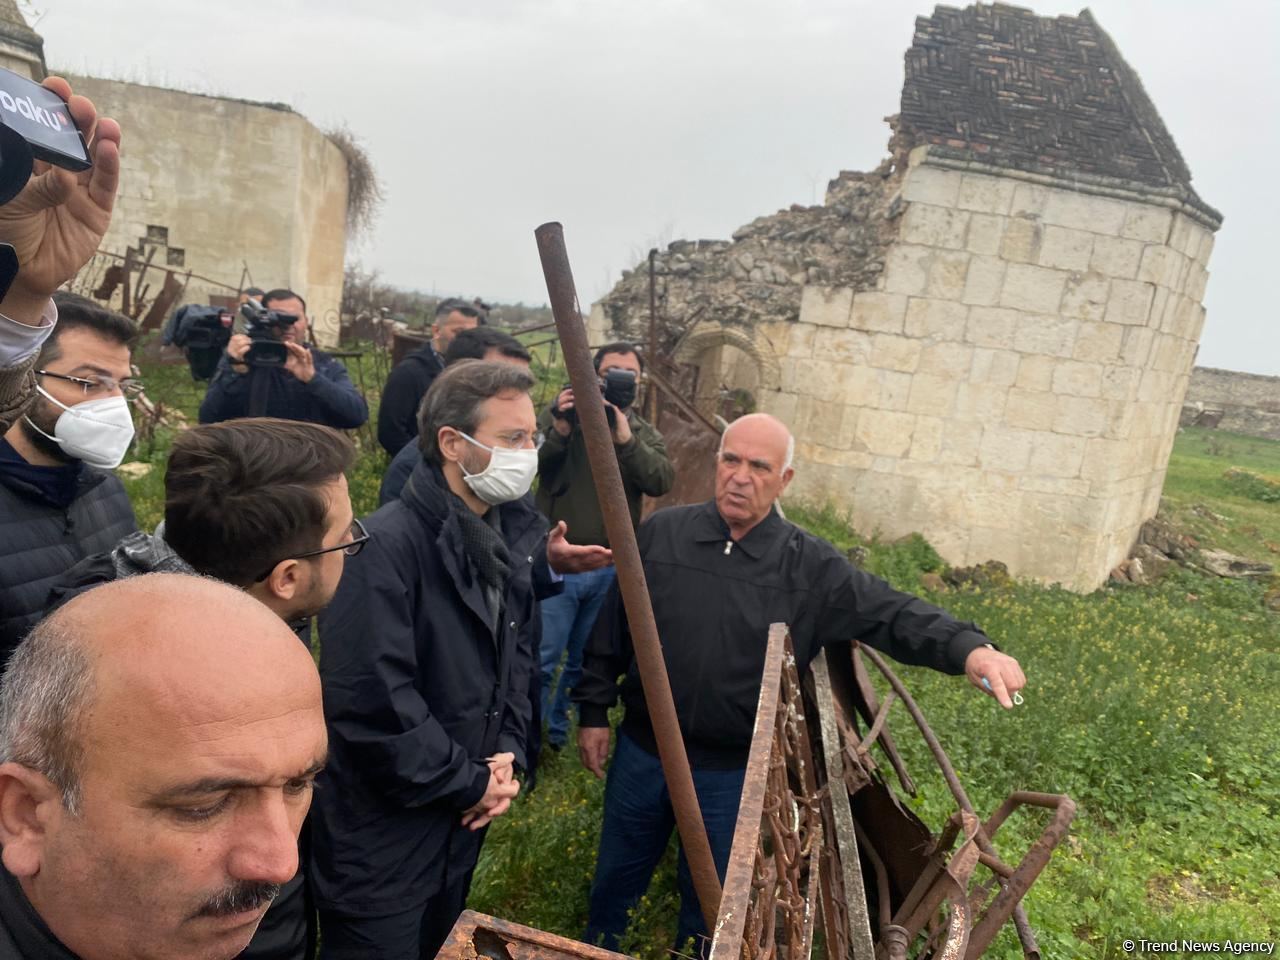 Delegation of Turkic Council visits Imarat cemetery destroyed by Armenians (PHOTO/VIDEO)